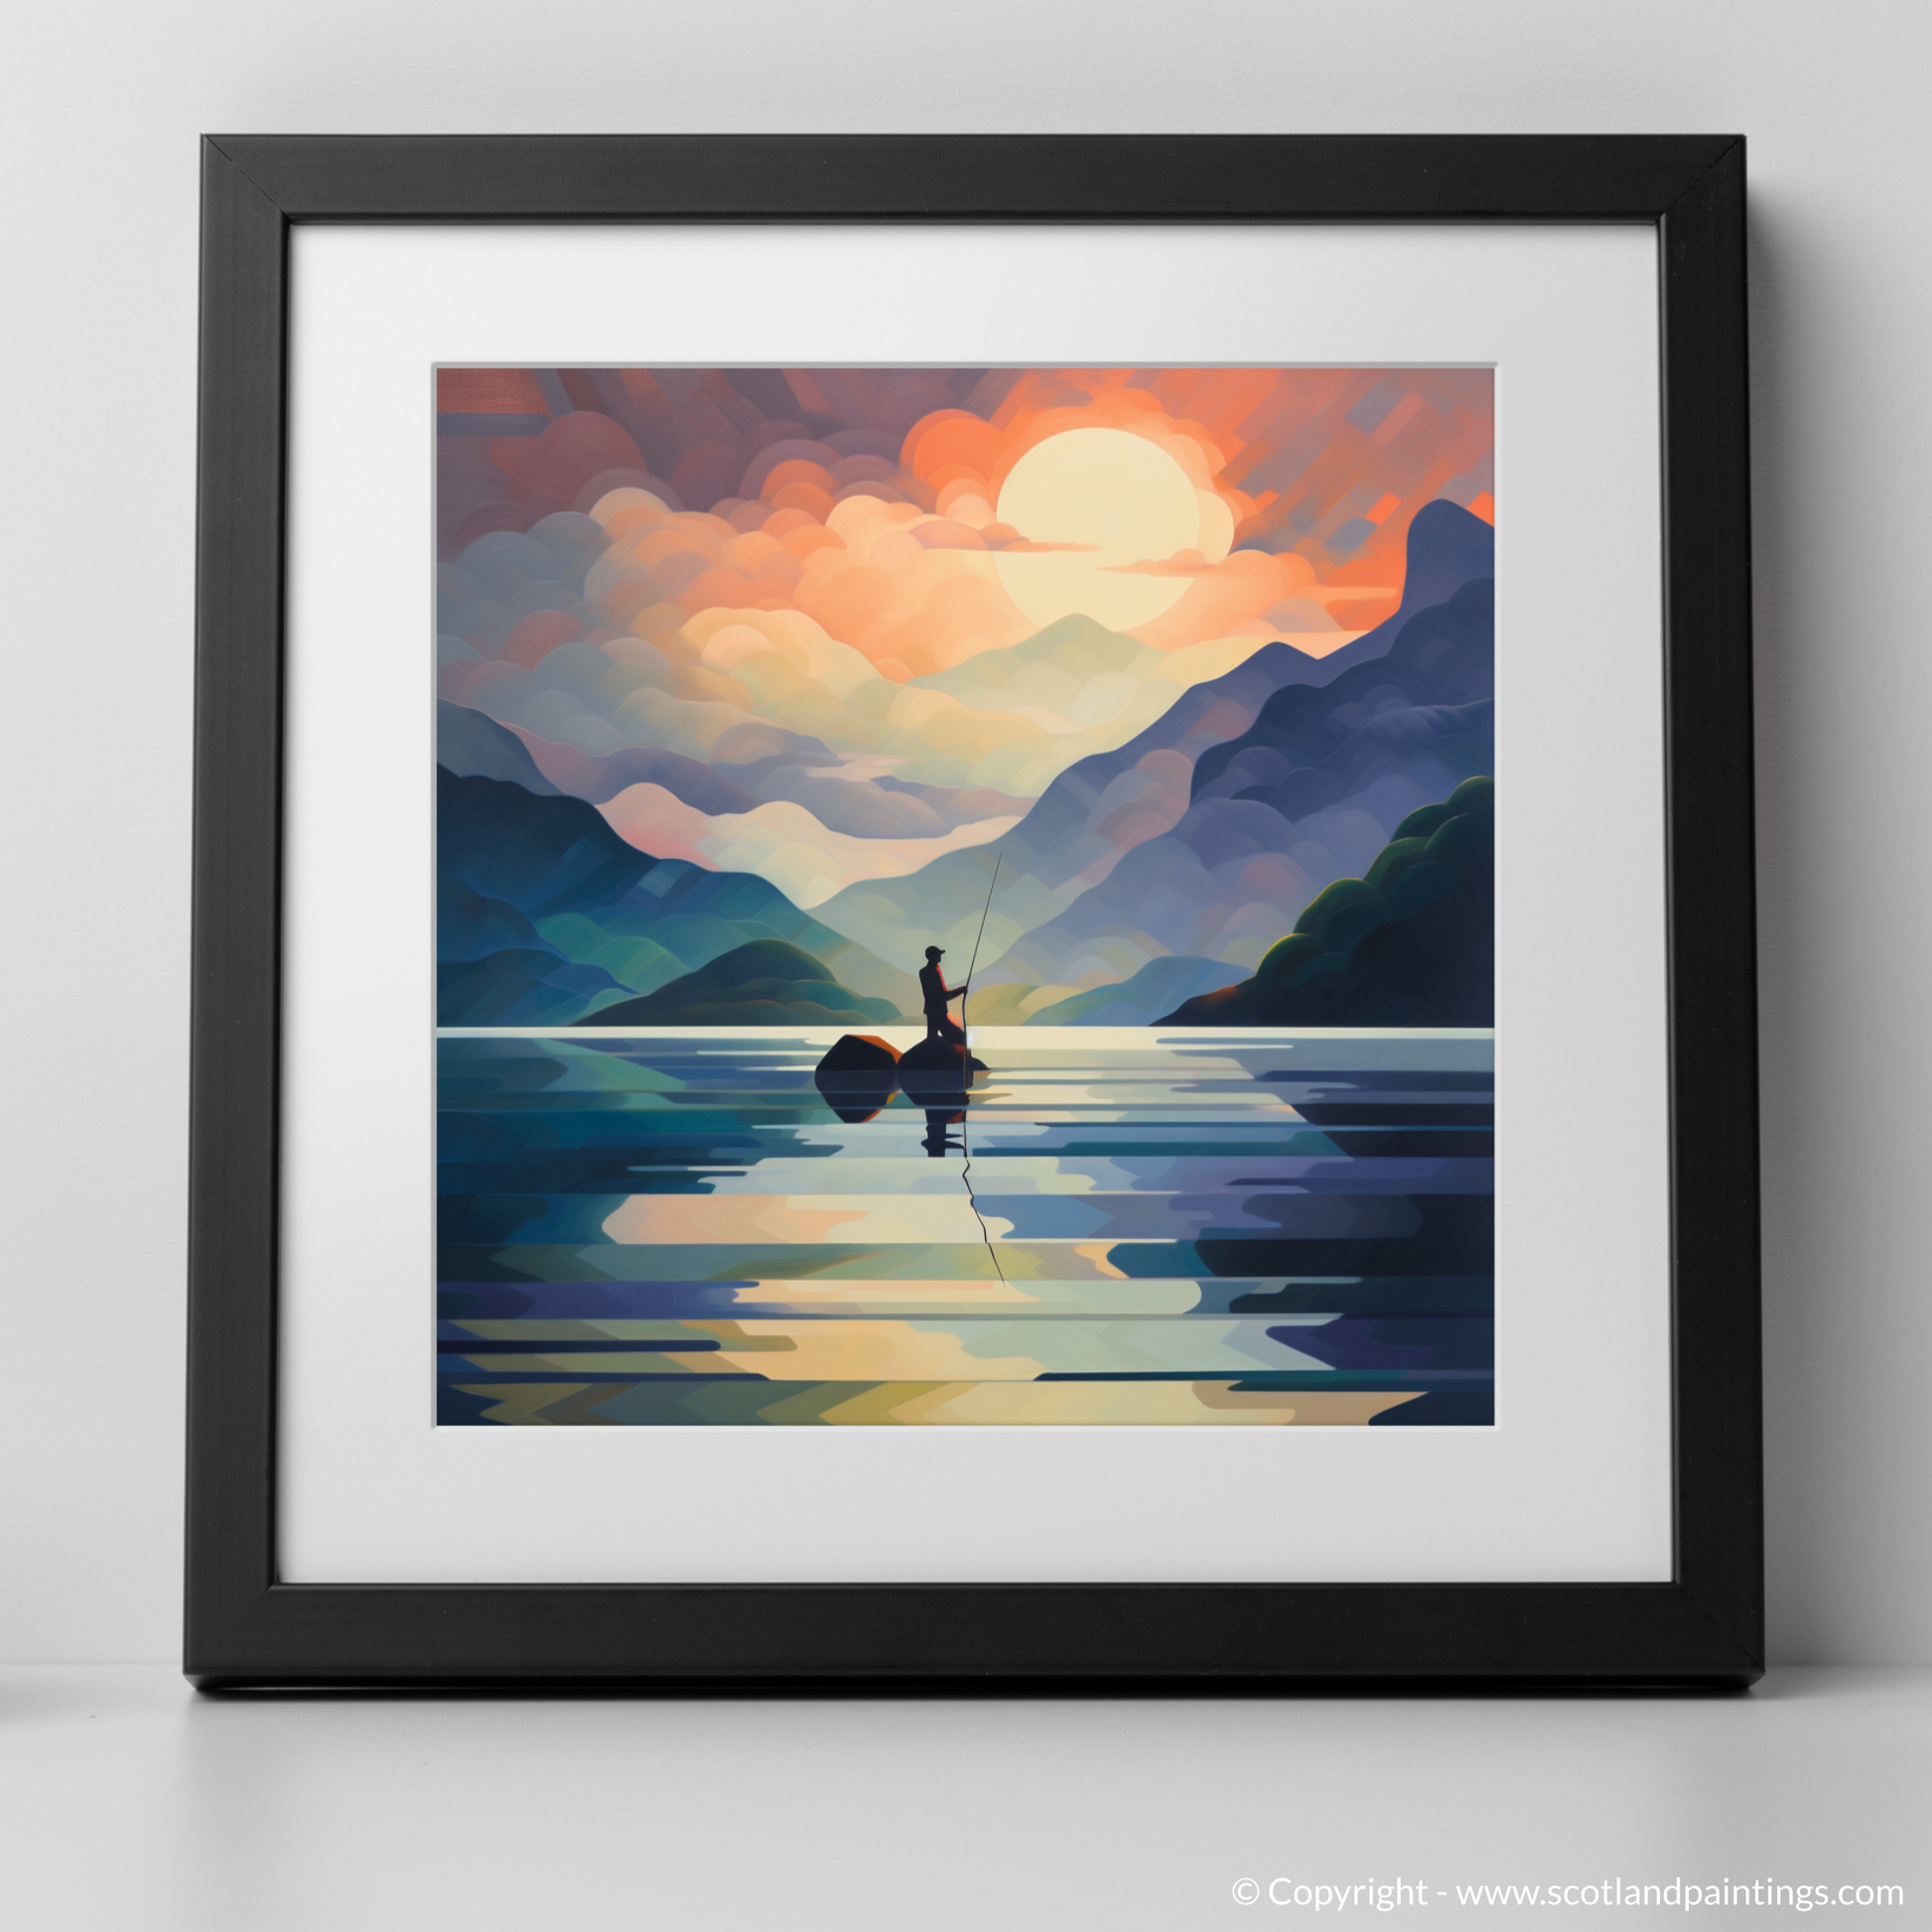 Art Print of Silhouetted fisherman on Loch Lomond with a black frame